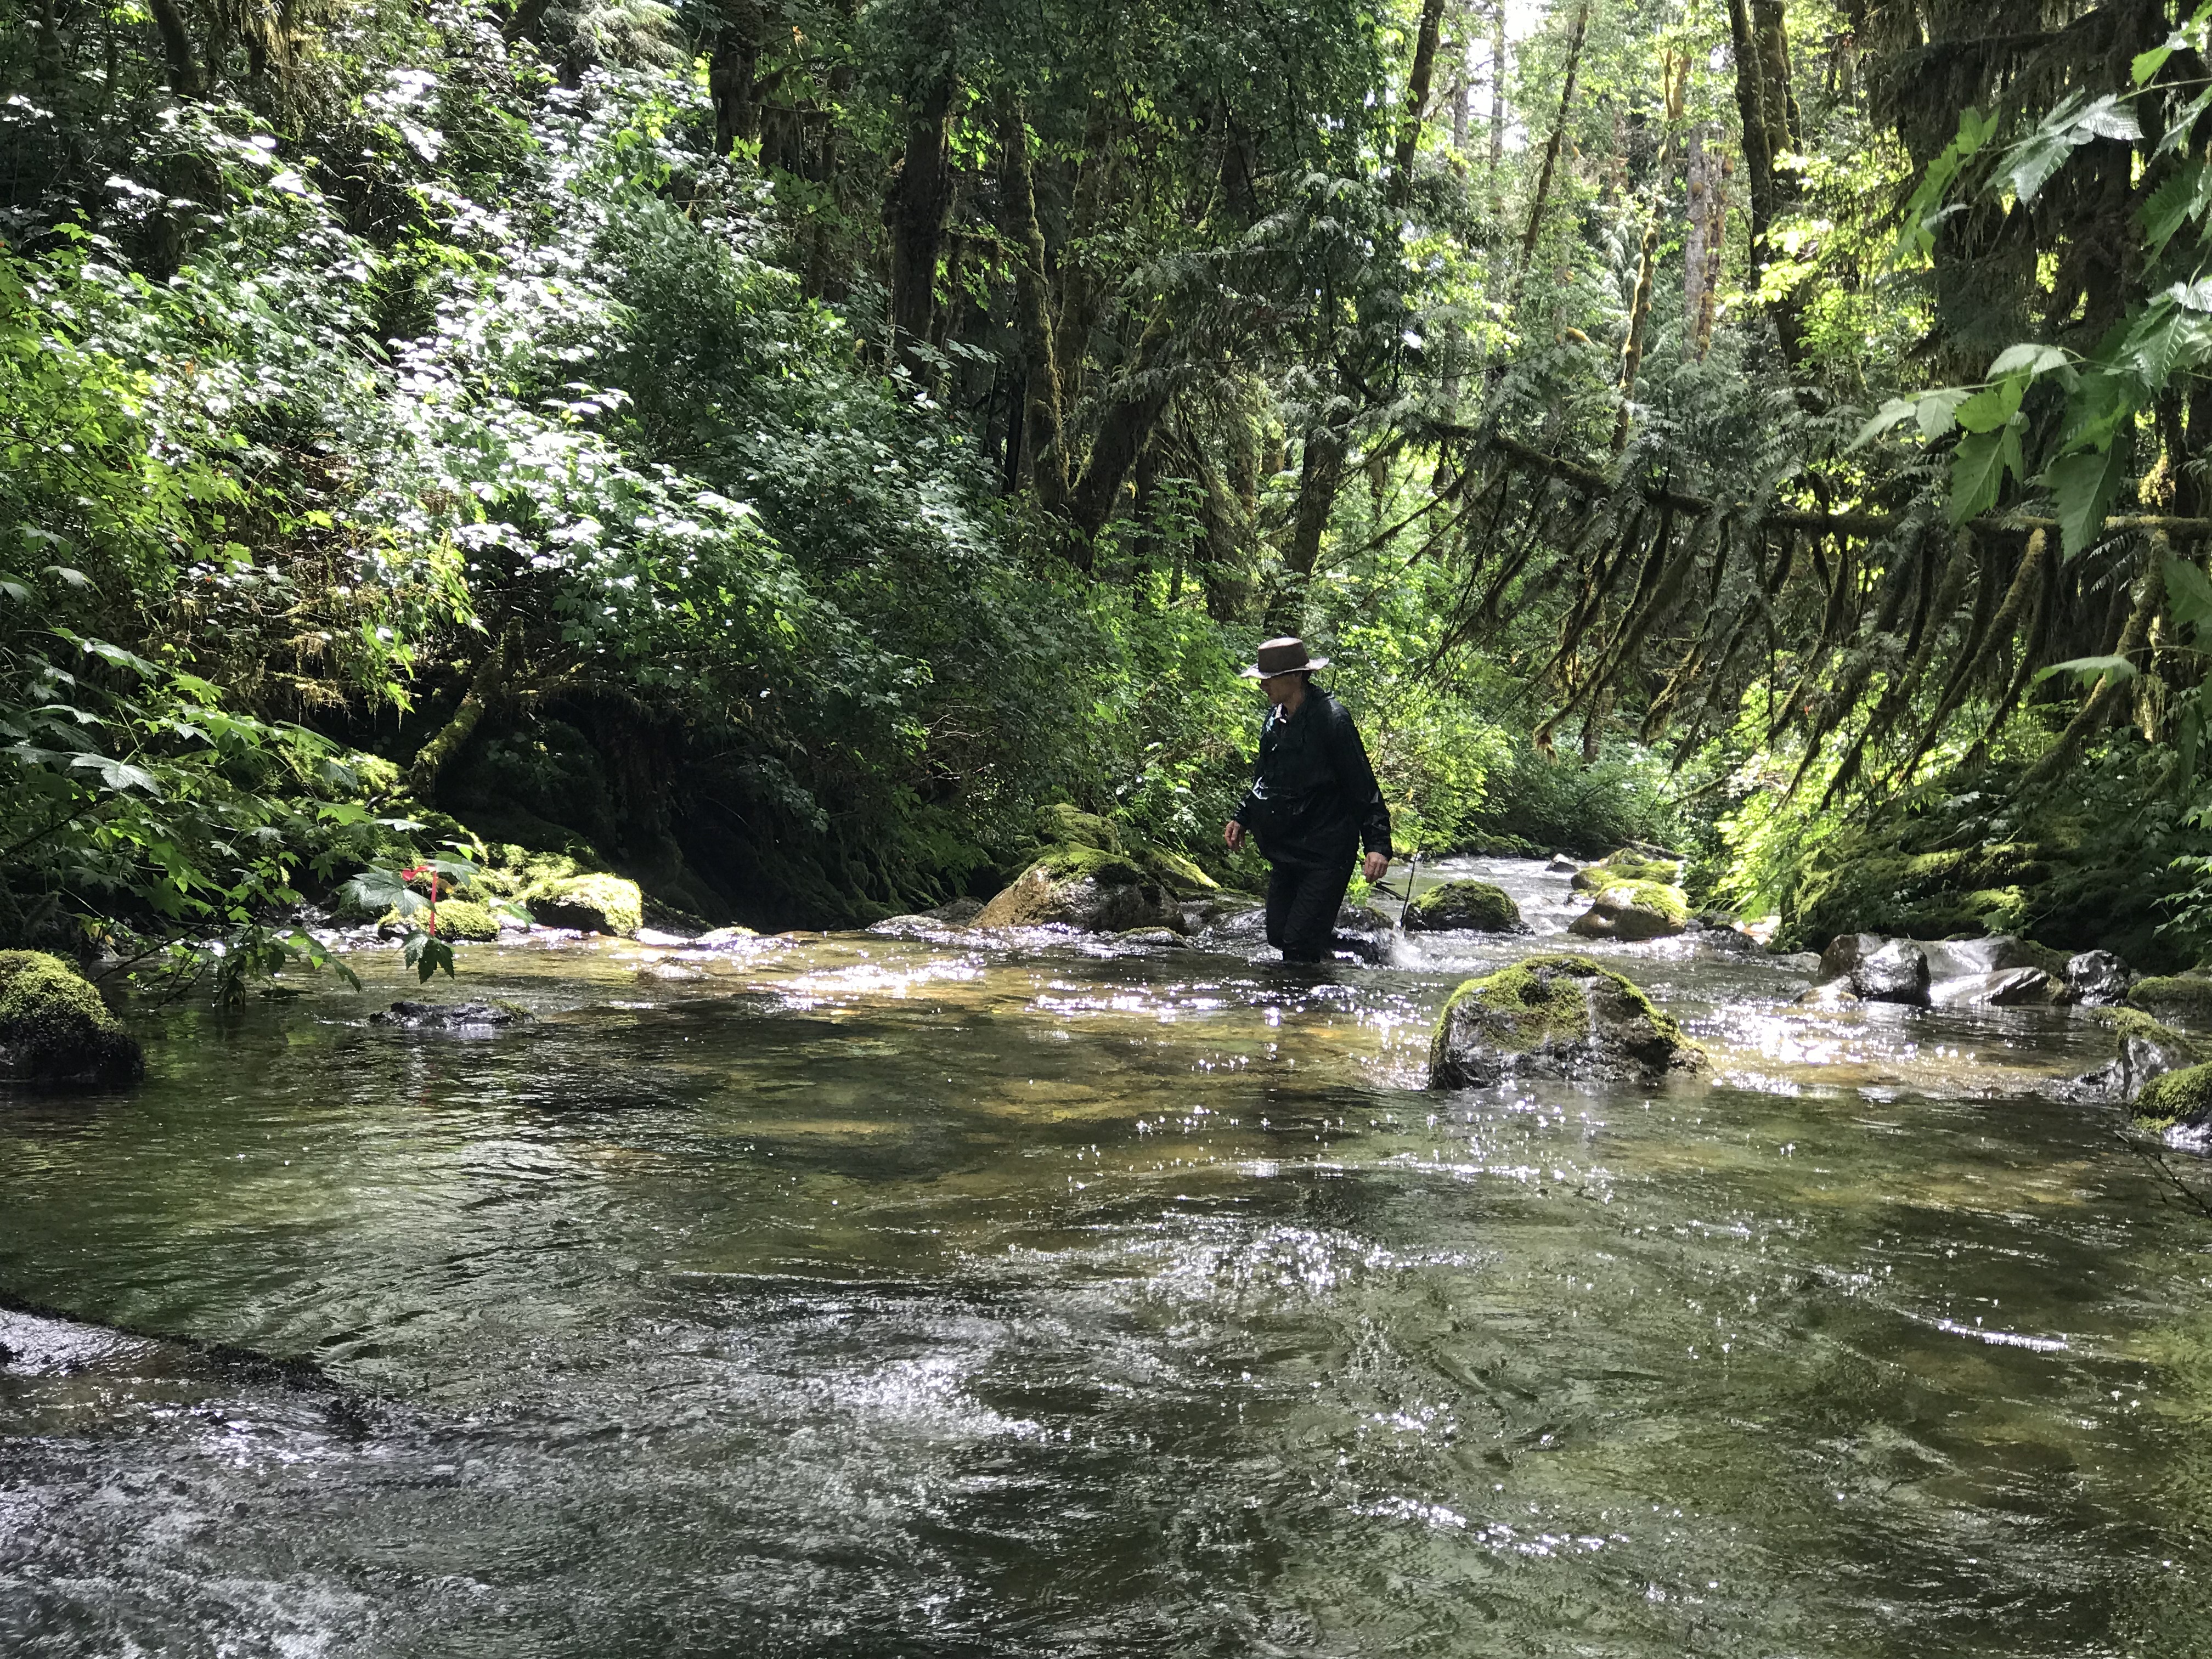 Above: Skagit Land Trust volunteer Pete Haas conducts salmon spawning surveys along White Creek at the White Creek Conservation Area in June of 2018. Photograph credit: Skagit Land Trust staff.